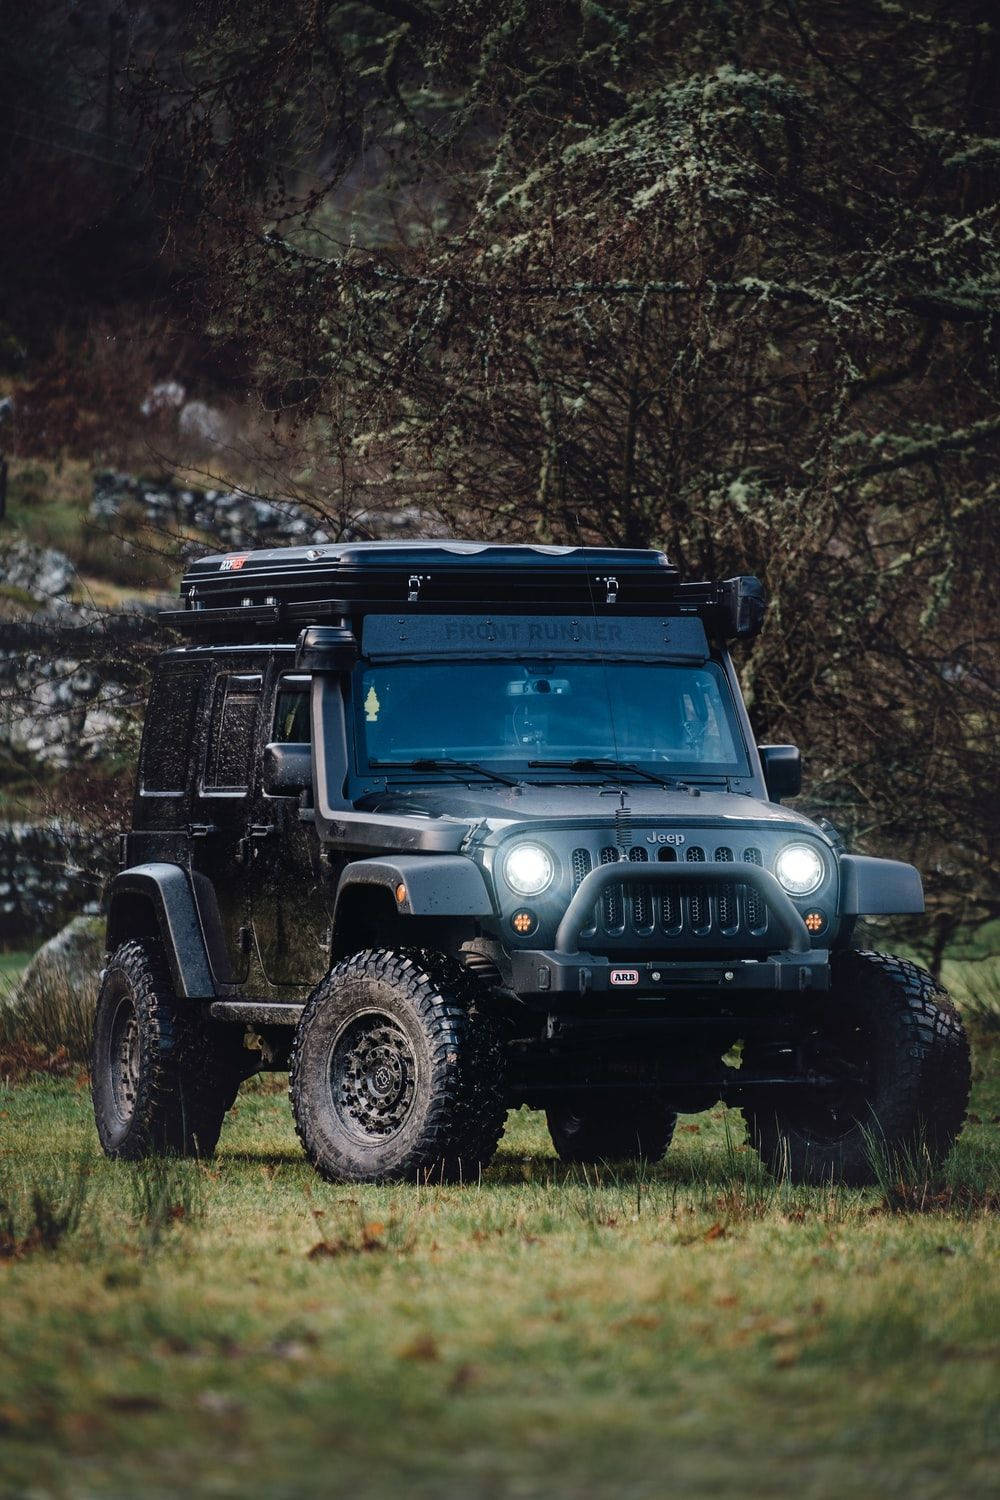 Dynamic Black Jeep Wrangler With Top Rack Over Rugged Terrain Background